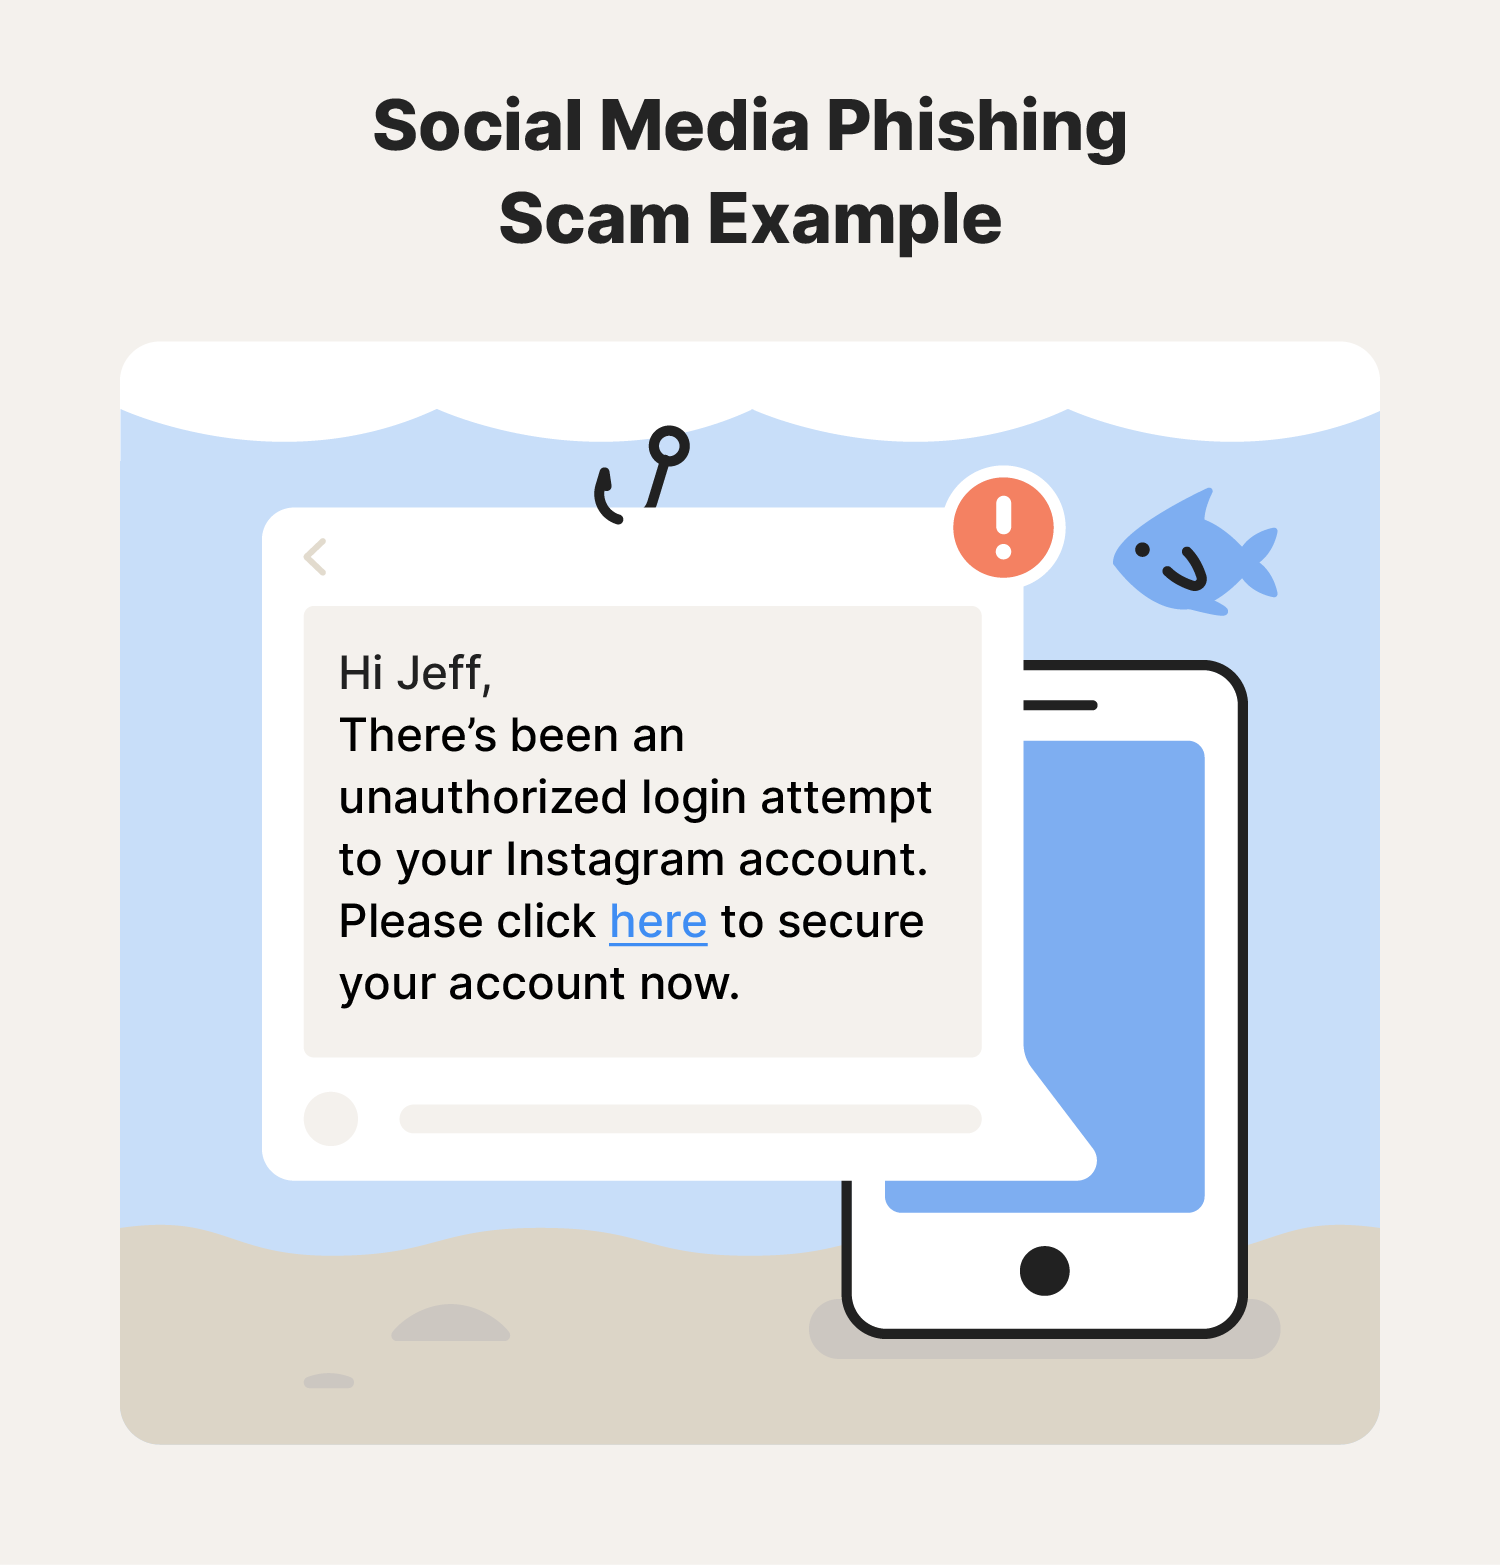 Illustrated chart featuring an example of a social media scam using phishing.